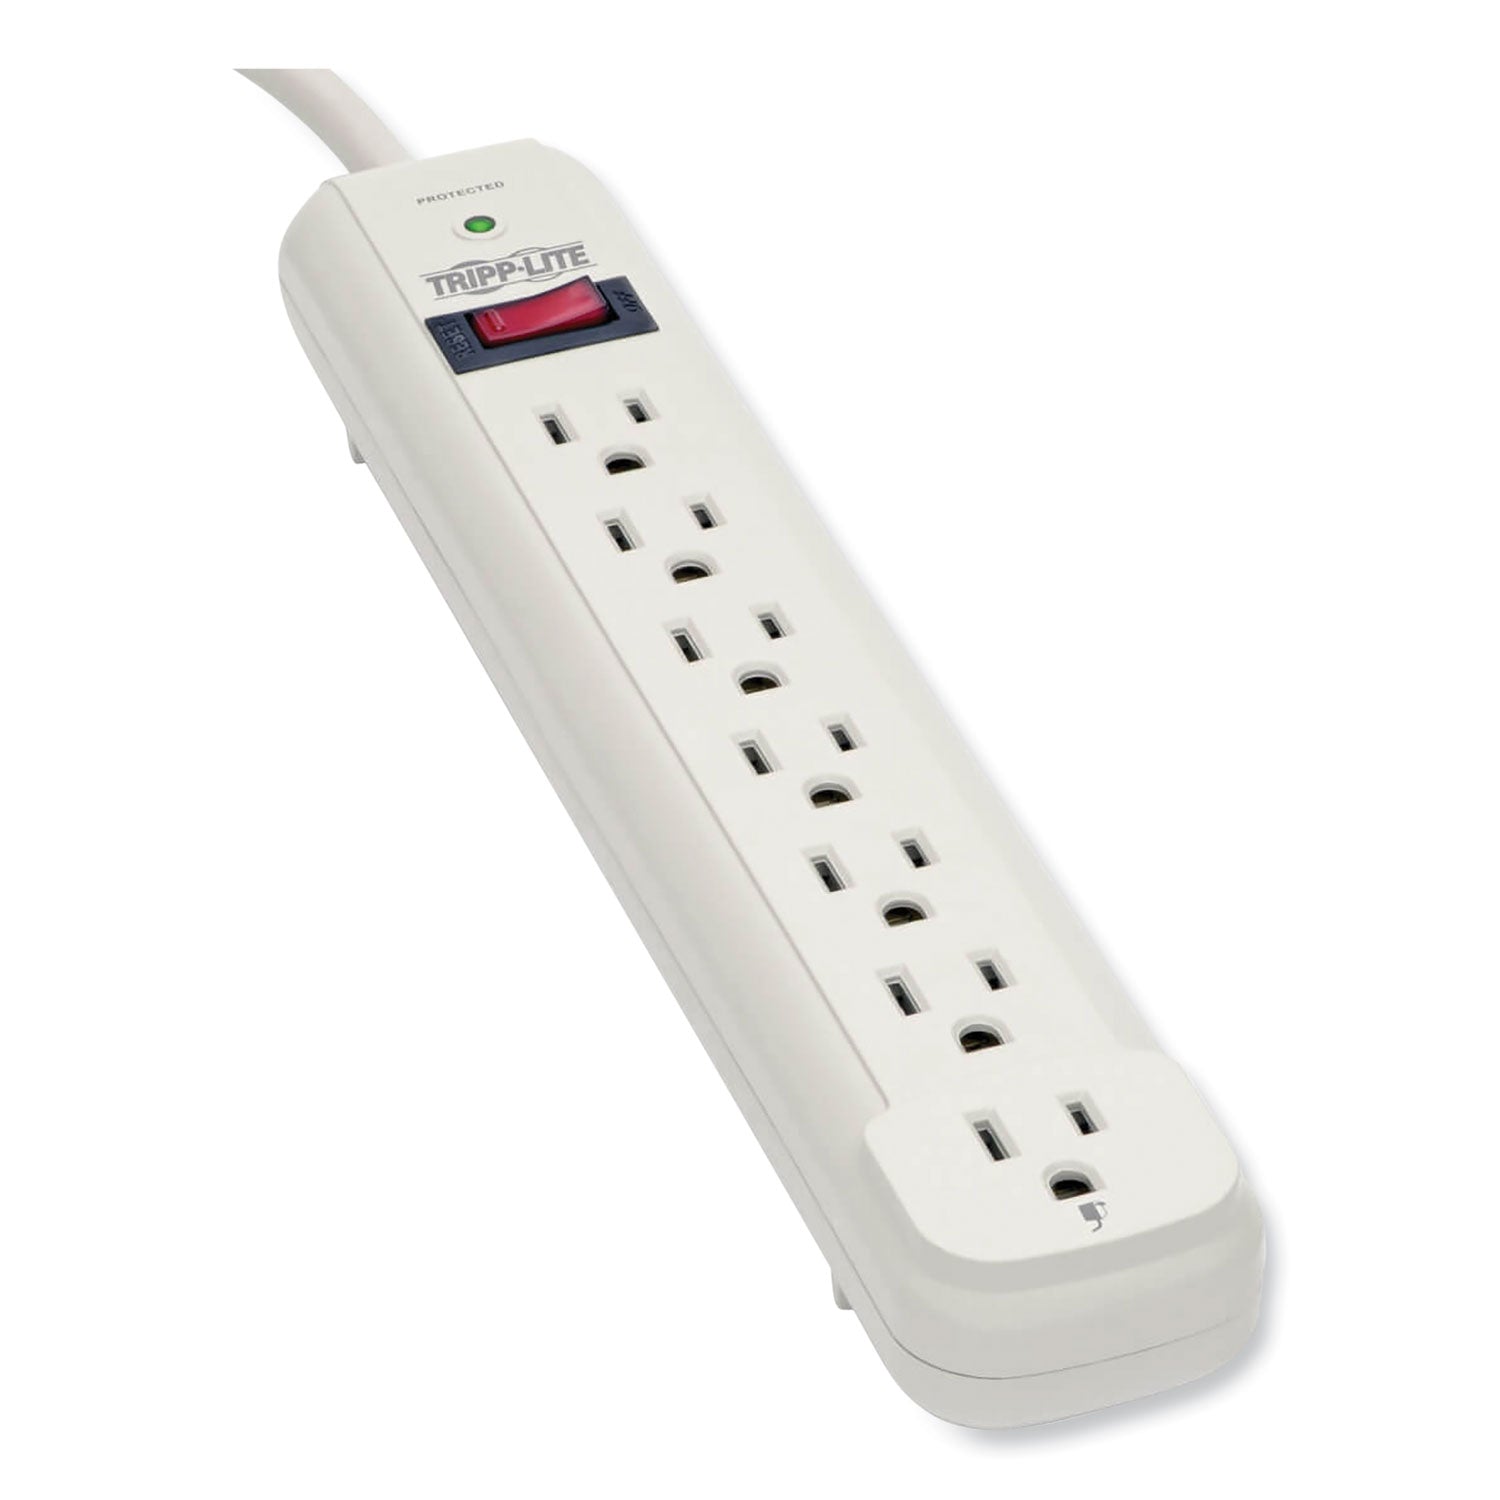 Protect It! Surge Protector, 7 AC Outlets, 25 ft Cord, 1,080 J, Light Gray - 